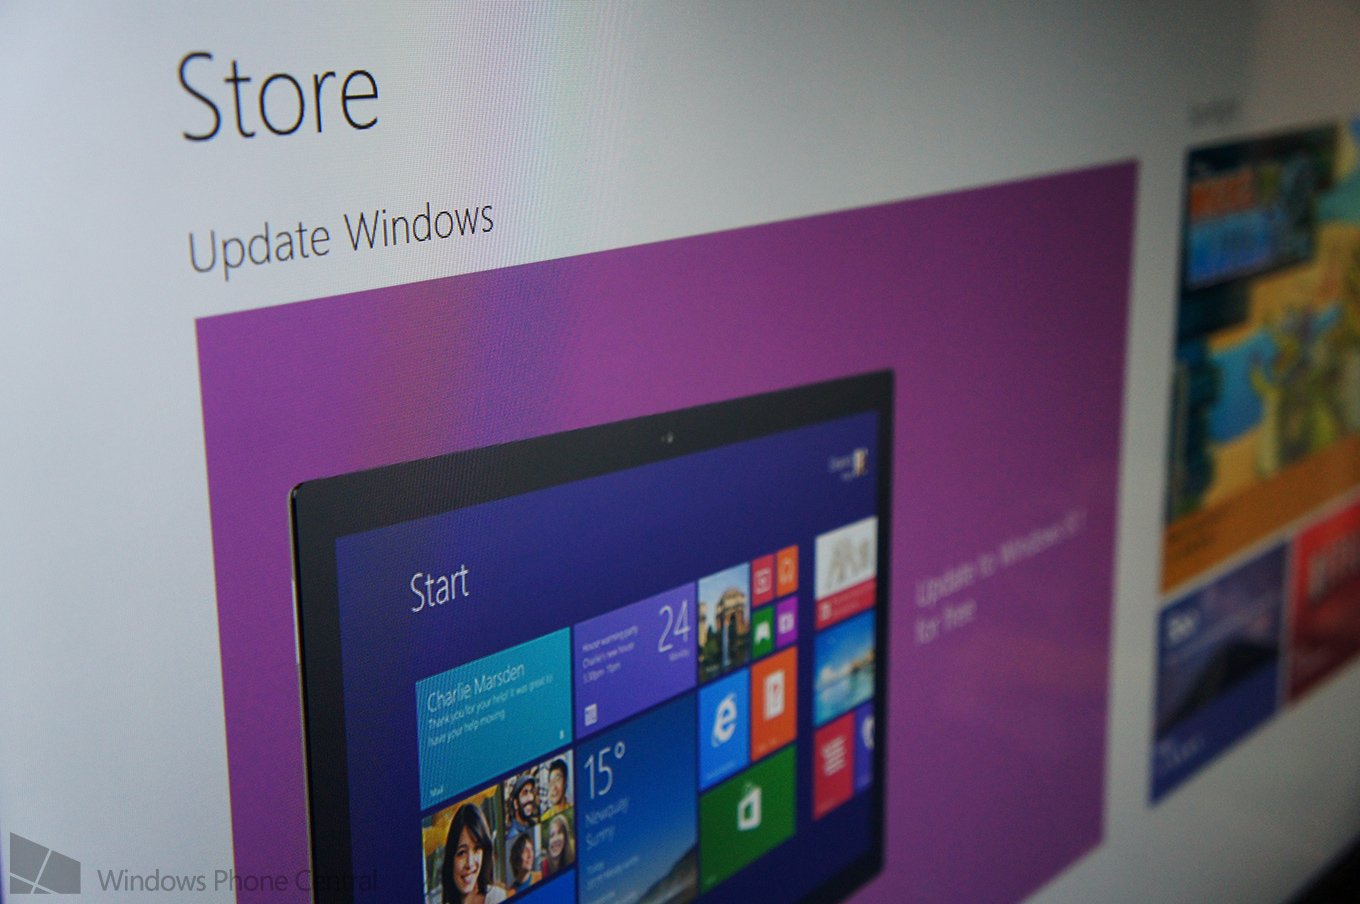 Play Store Download for Windows 8